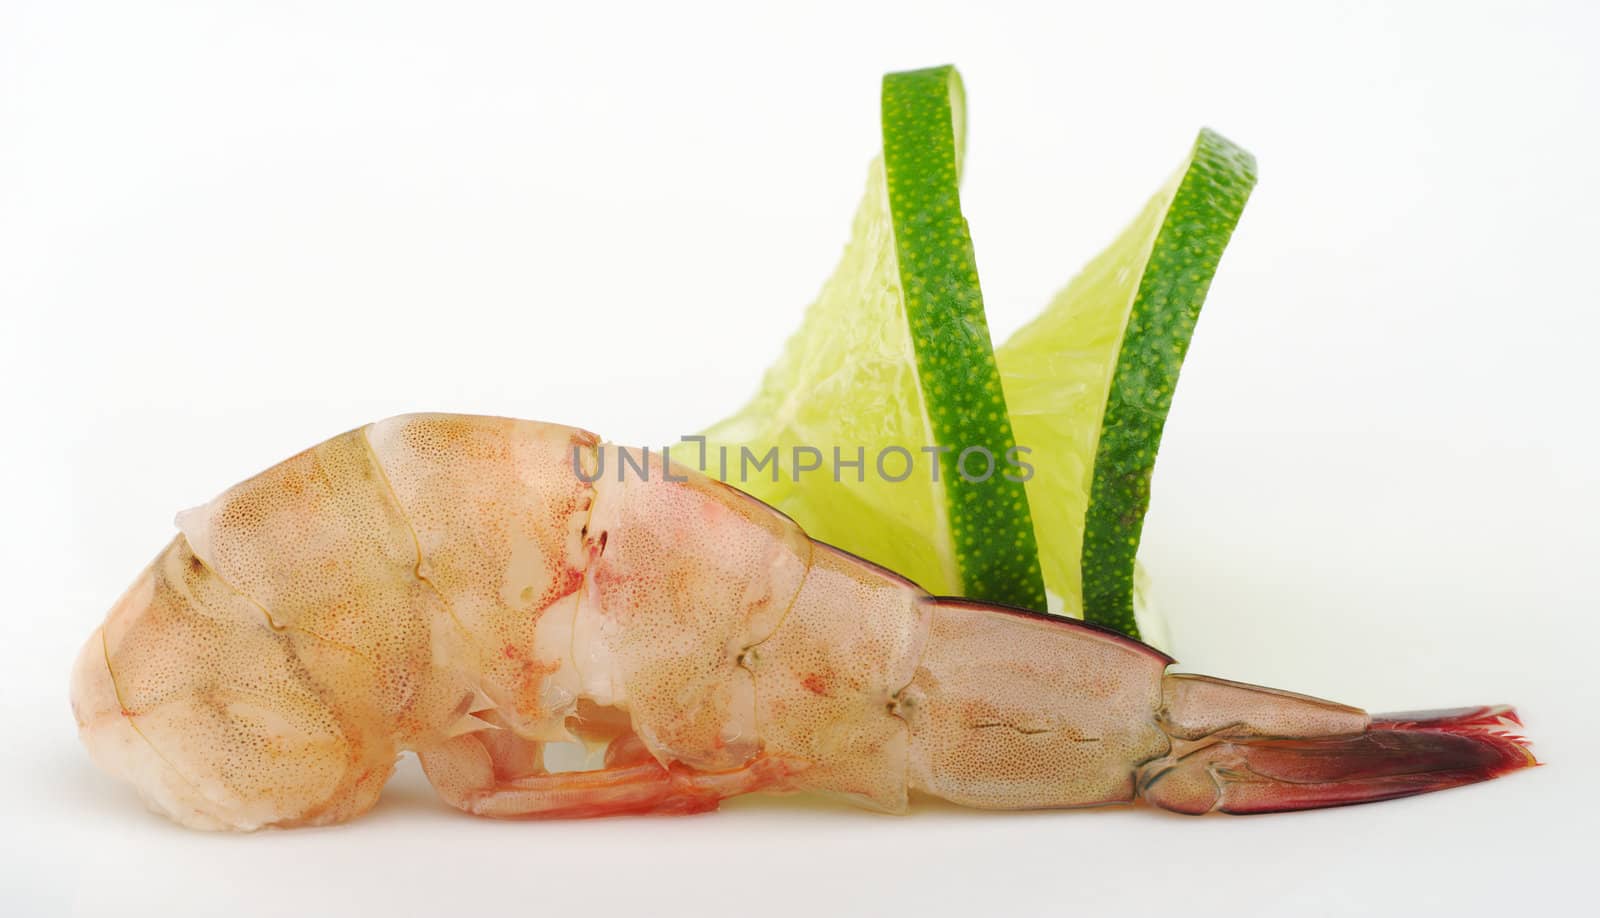 King Prawn with Lime Slices by sven